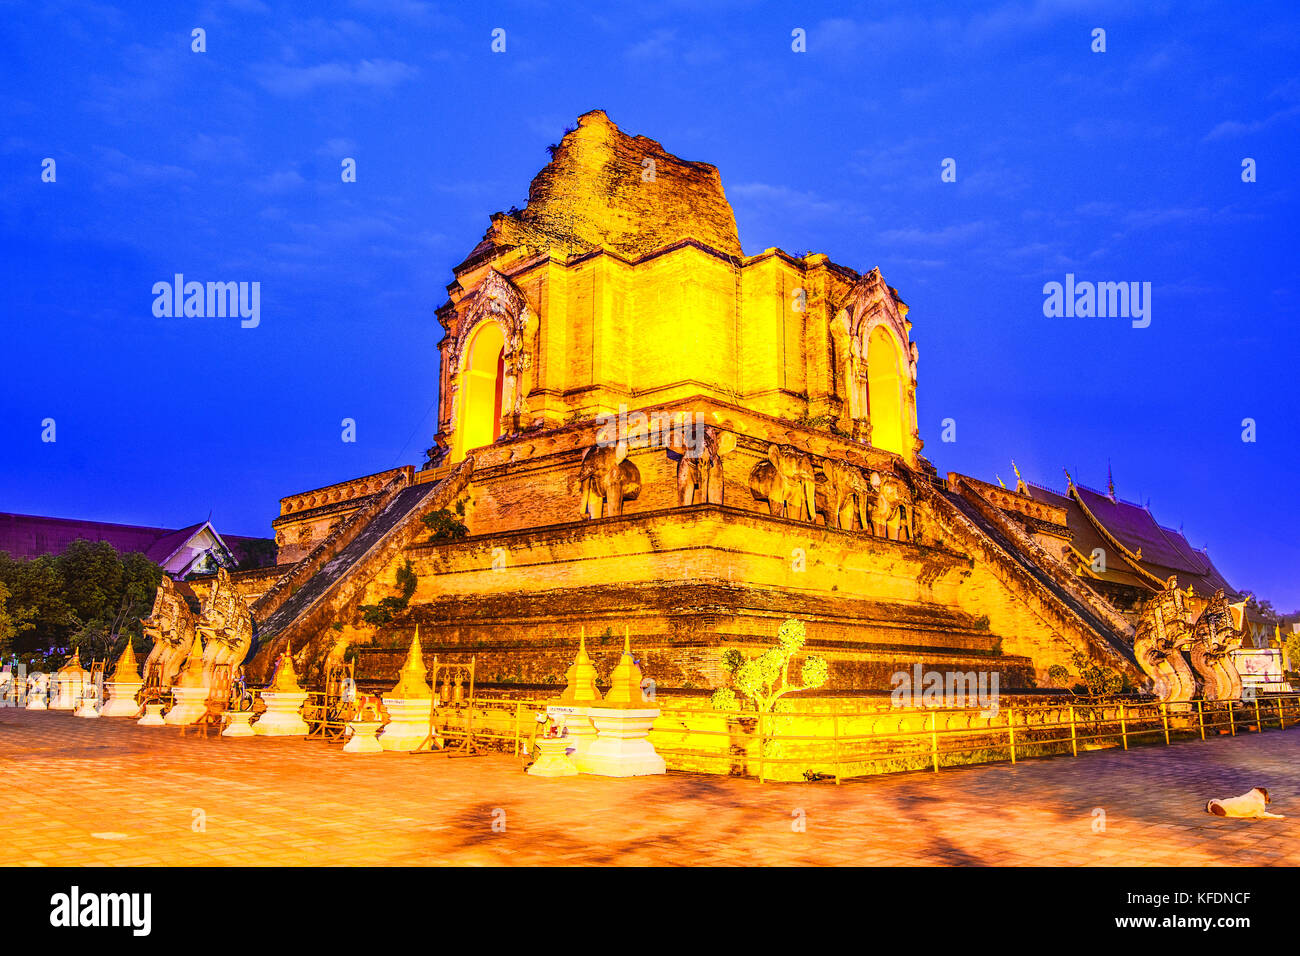 Nachtansicht ofa ncient Pagode in Wat Chedi Luang in Chiang Mai, Provinz von Thailand, Asien Stockfoto